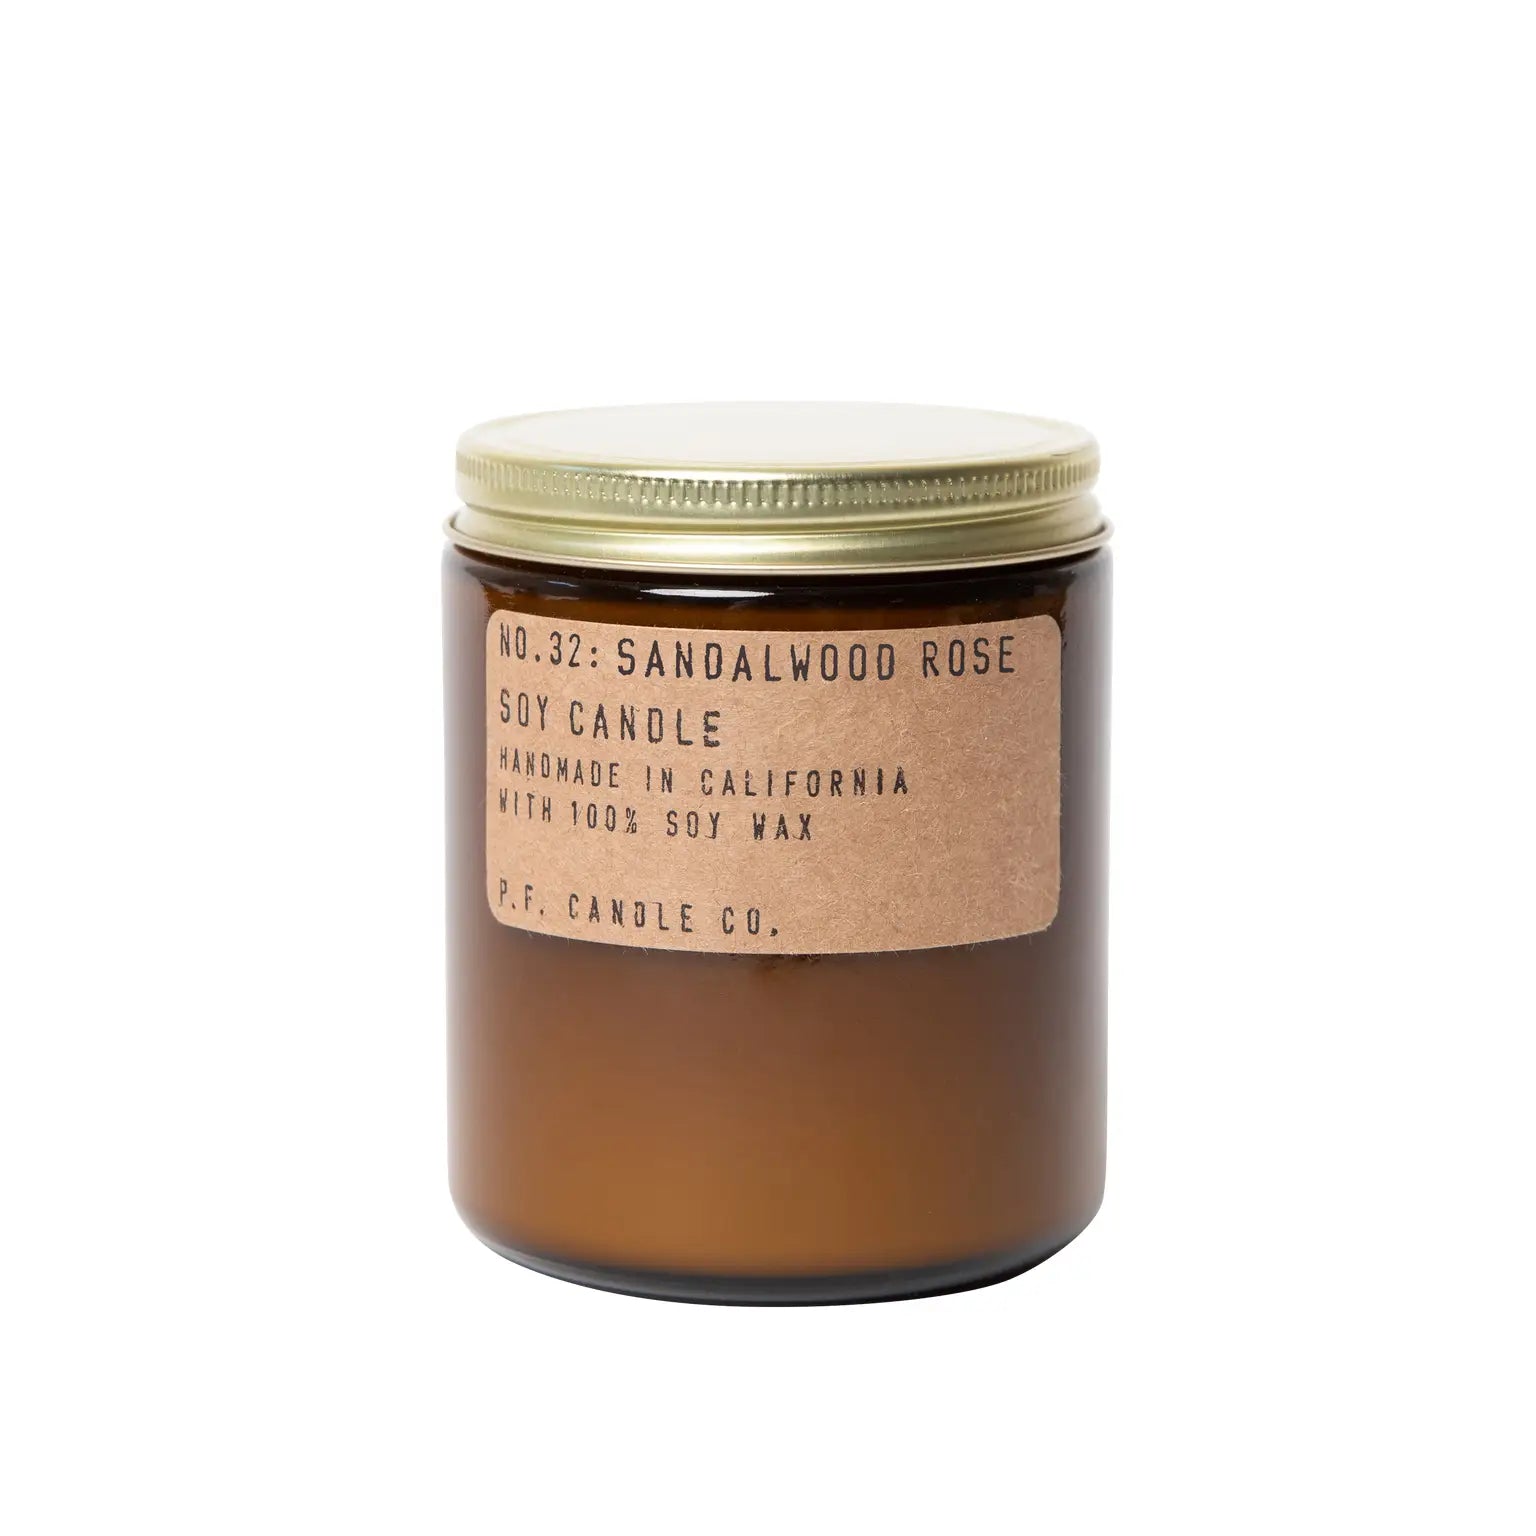 sandalwood rose candle by P.F. Candle Co.